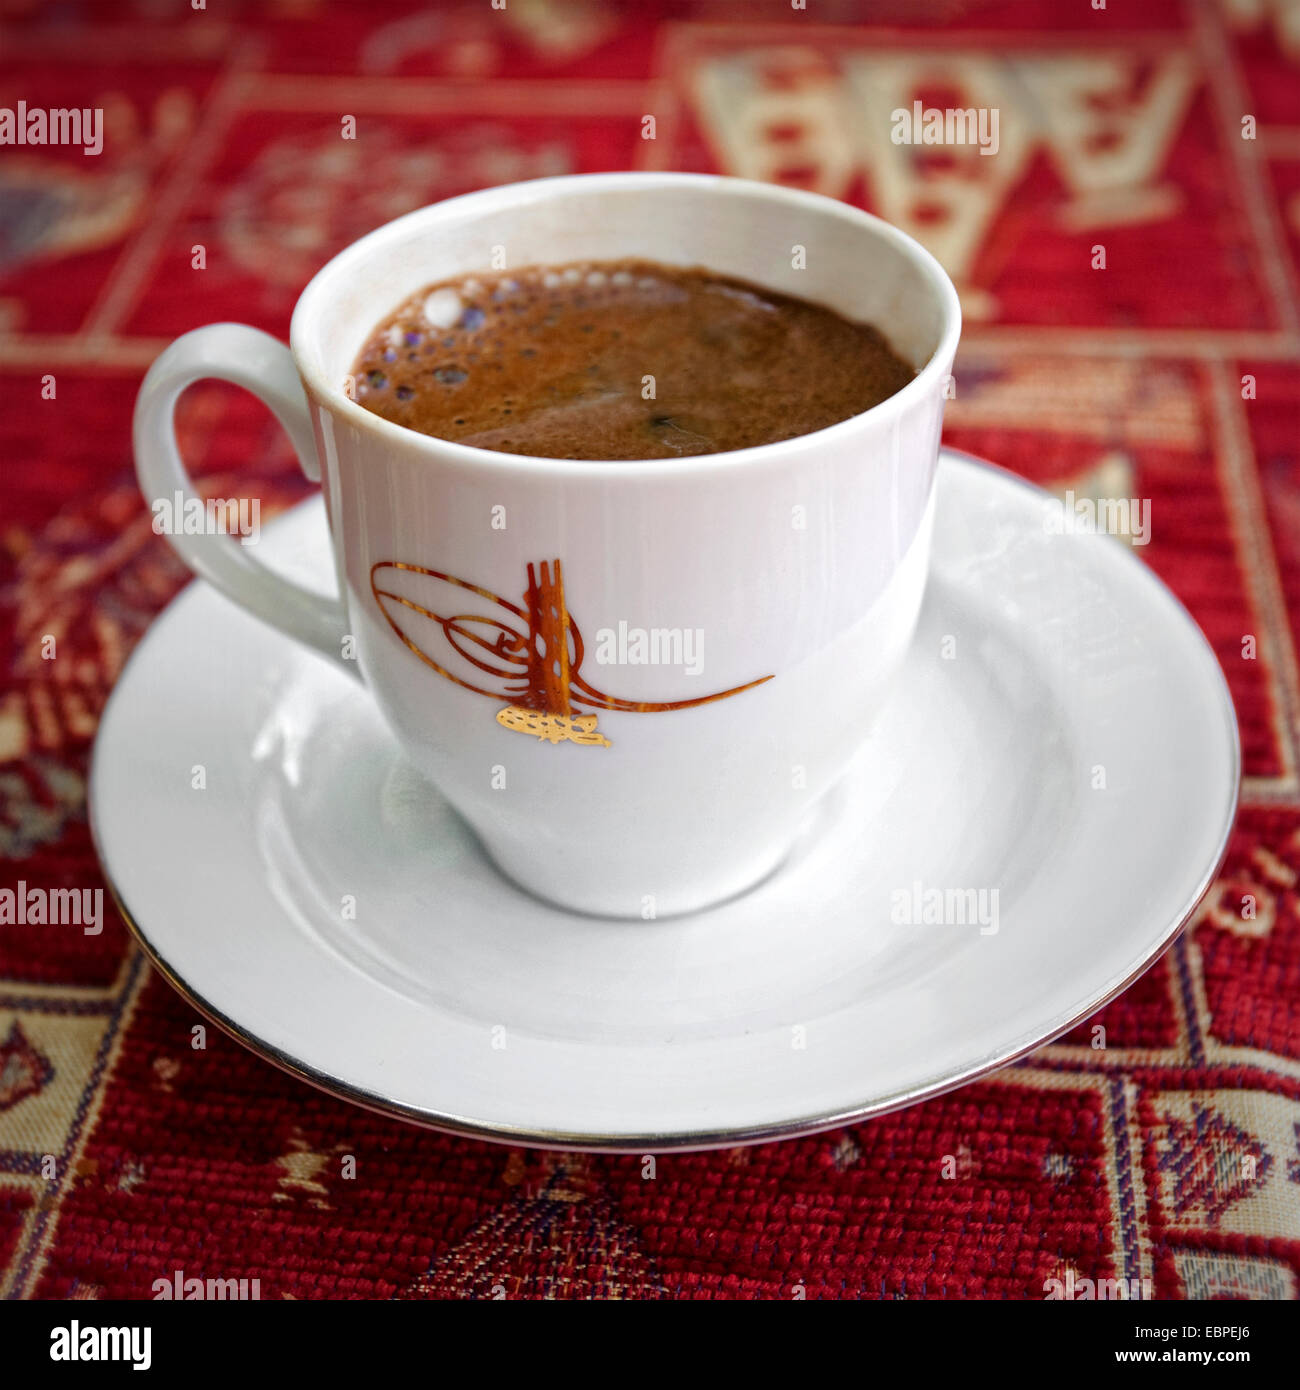 Close up of cup of turkish coffee sitting on red table clothe Stock Photo